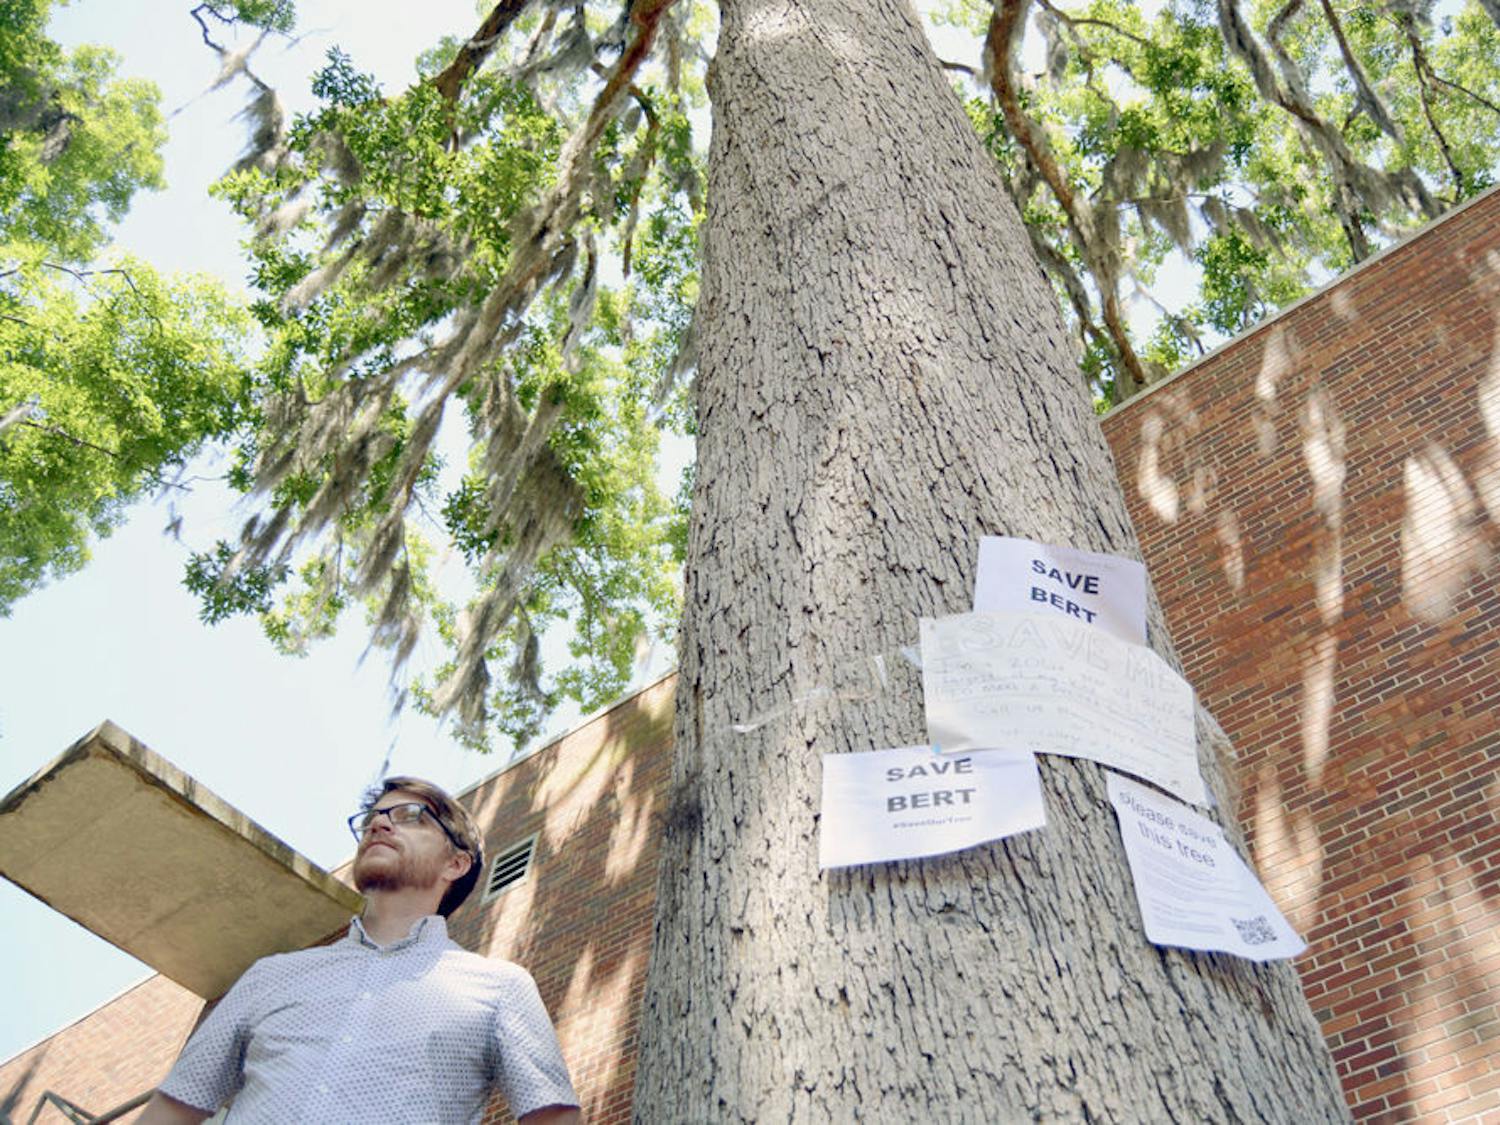 Jason Smith, a 38-year-old UF forest pathology associate professor, poses on the North Lawn next to Bert, the approximately 200-year-old Bluff Oak that was threatened by the College of Engineering’s Nexus building, a proposed expansion to existing teaching and research labs.